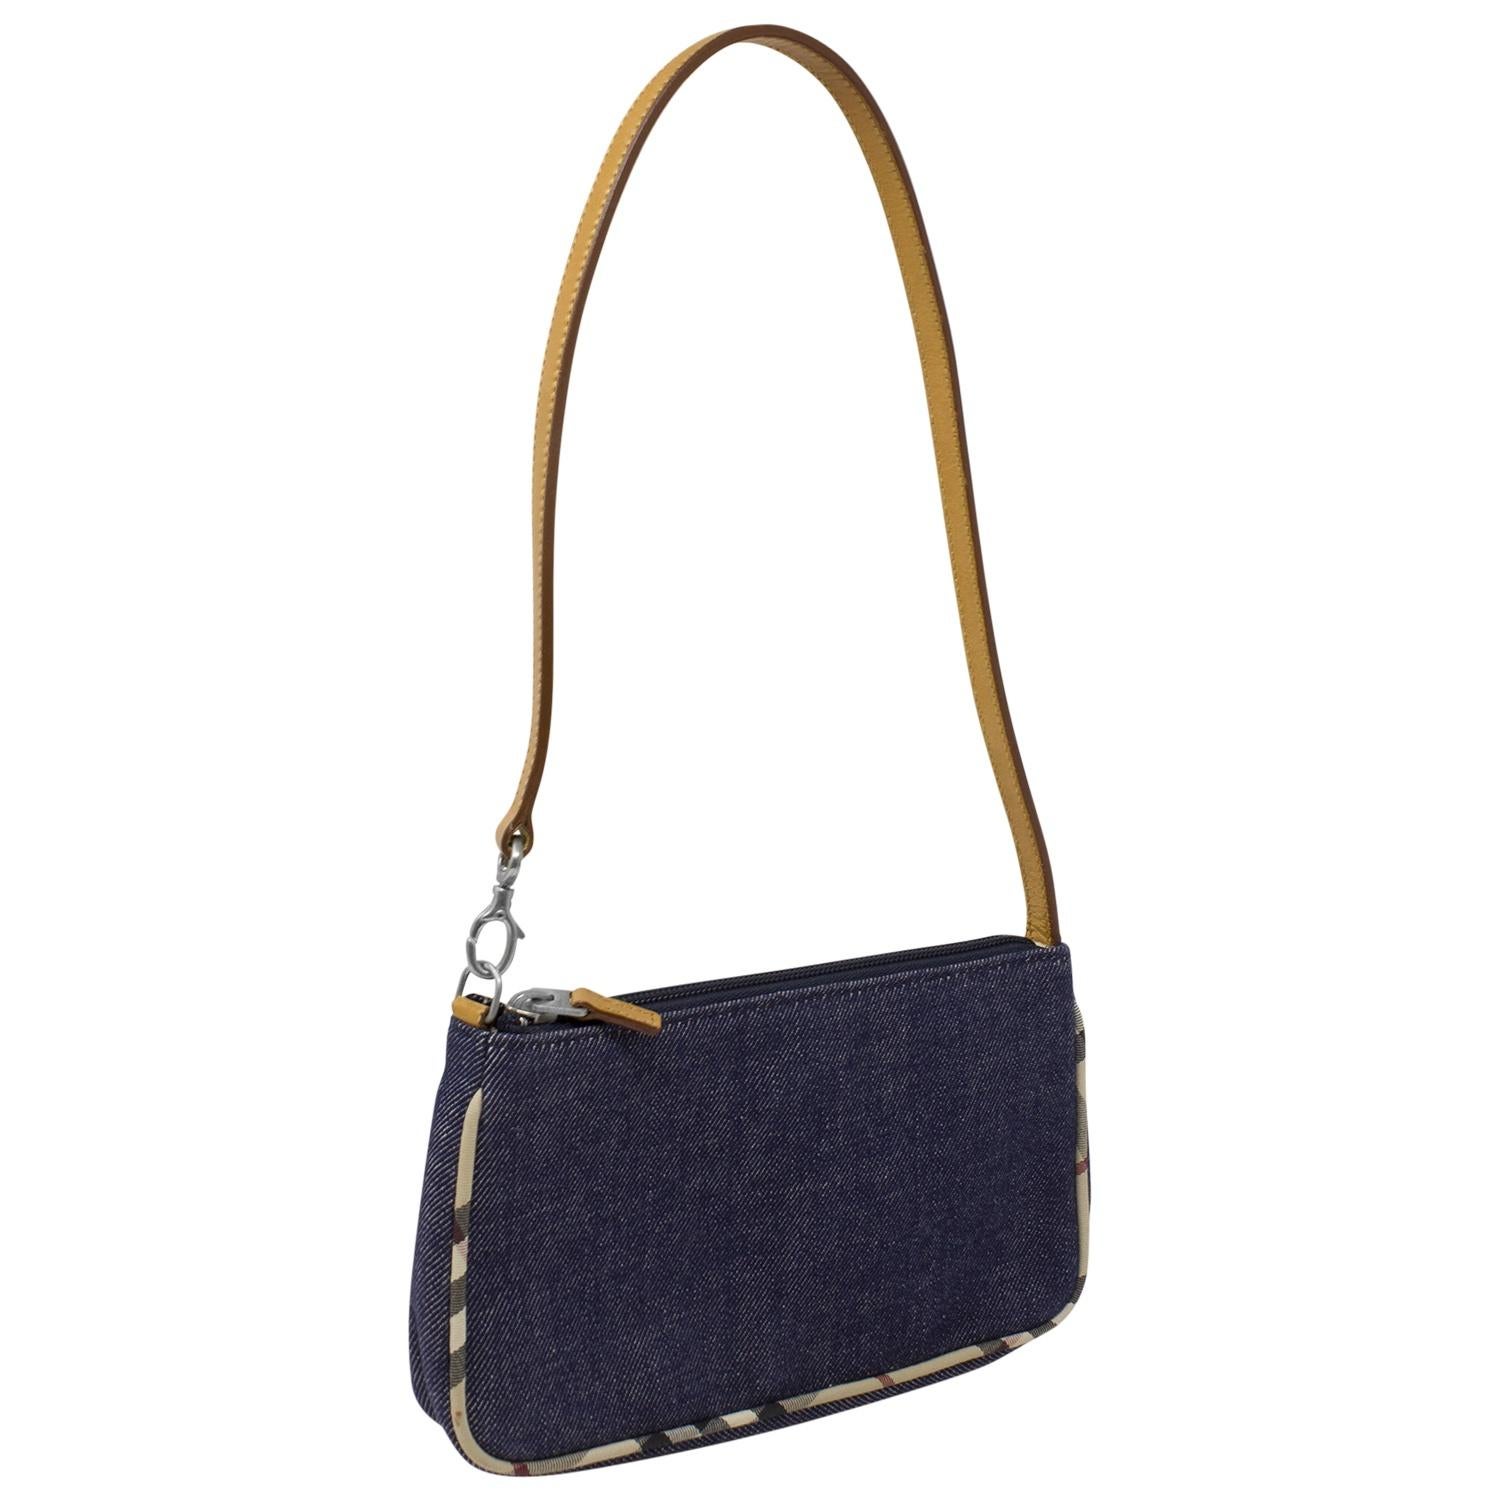 This is tooooo cute!!!! This denim blue Burberry shoulder bag has the perfect detailing and sihlouette. We are obsessed with the beige leather single shoulder strap that is the perfect shoulder strap drop. The denim is the perfect wash as well and